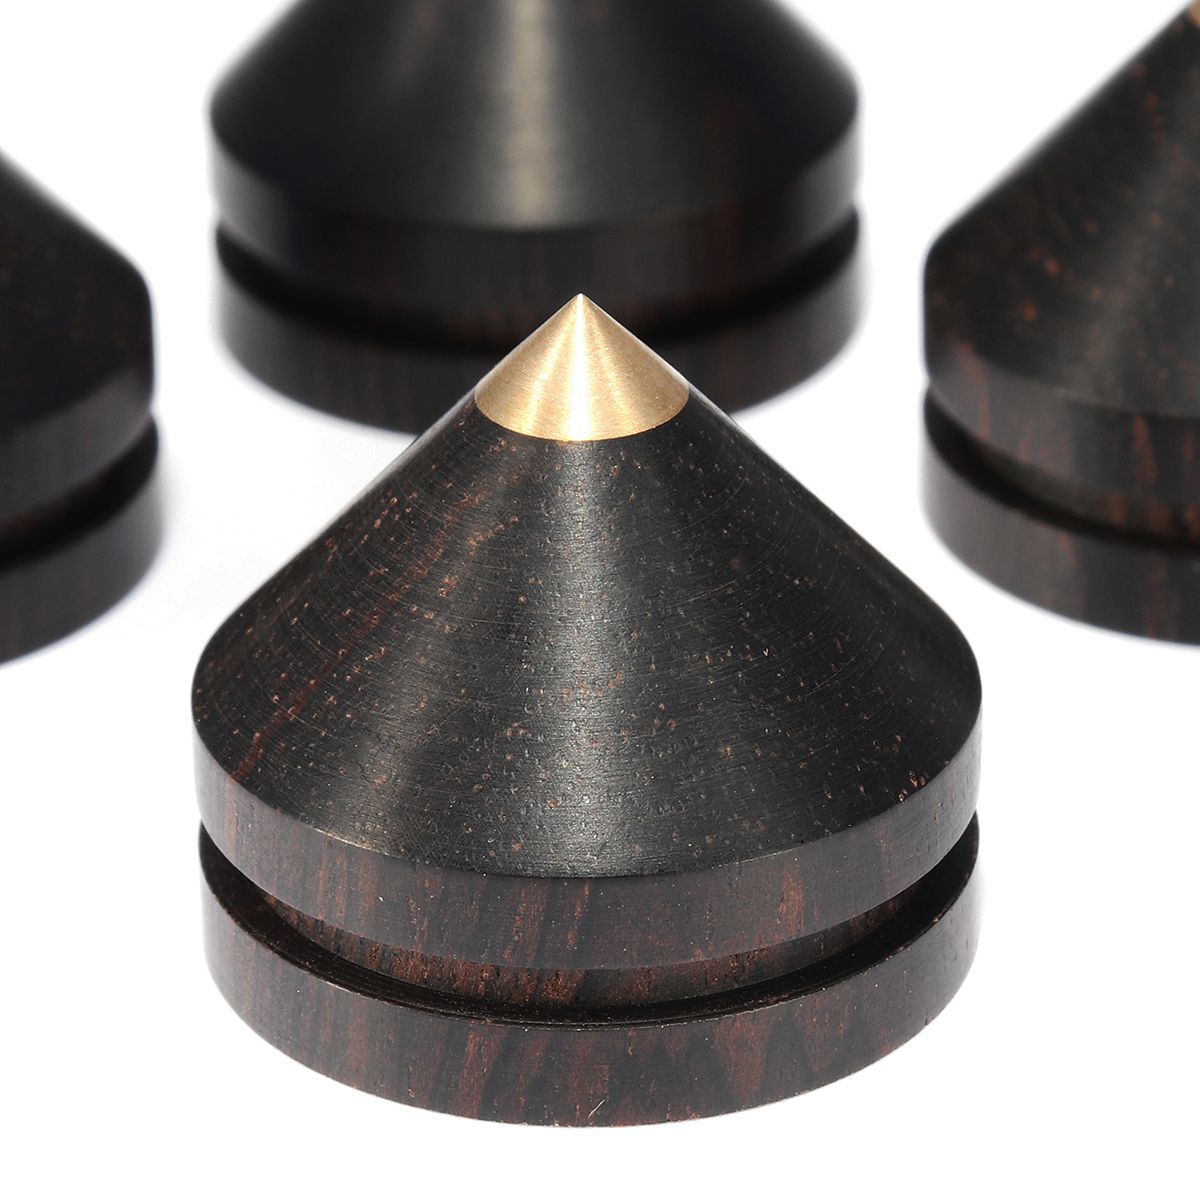 4Pcs-Ebony-Speaker-Spike-Isolation-Stand-Wooden-Copper-Tip-Feet-Spike-with-23mm-Base-Pad-1390545